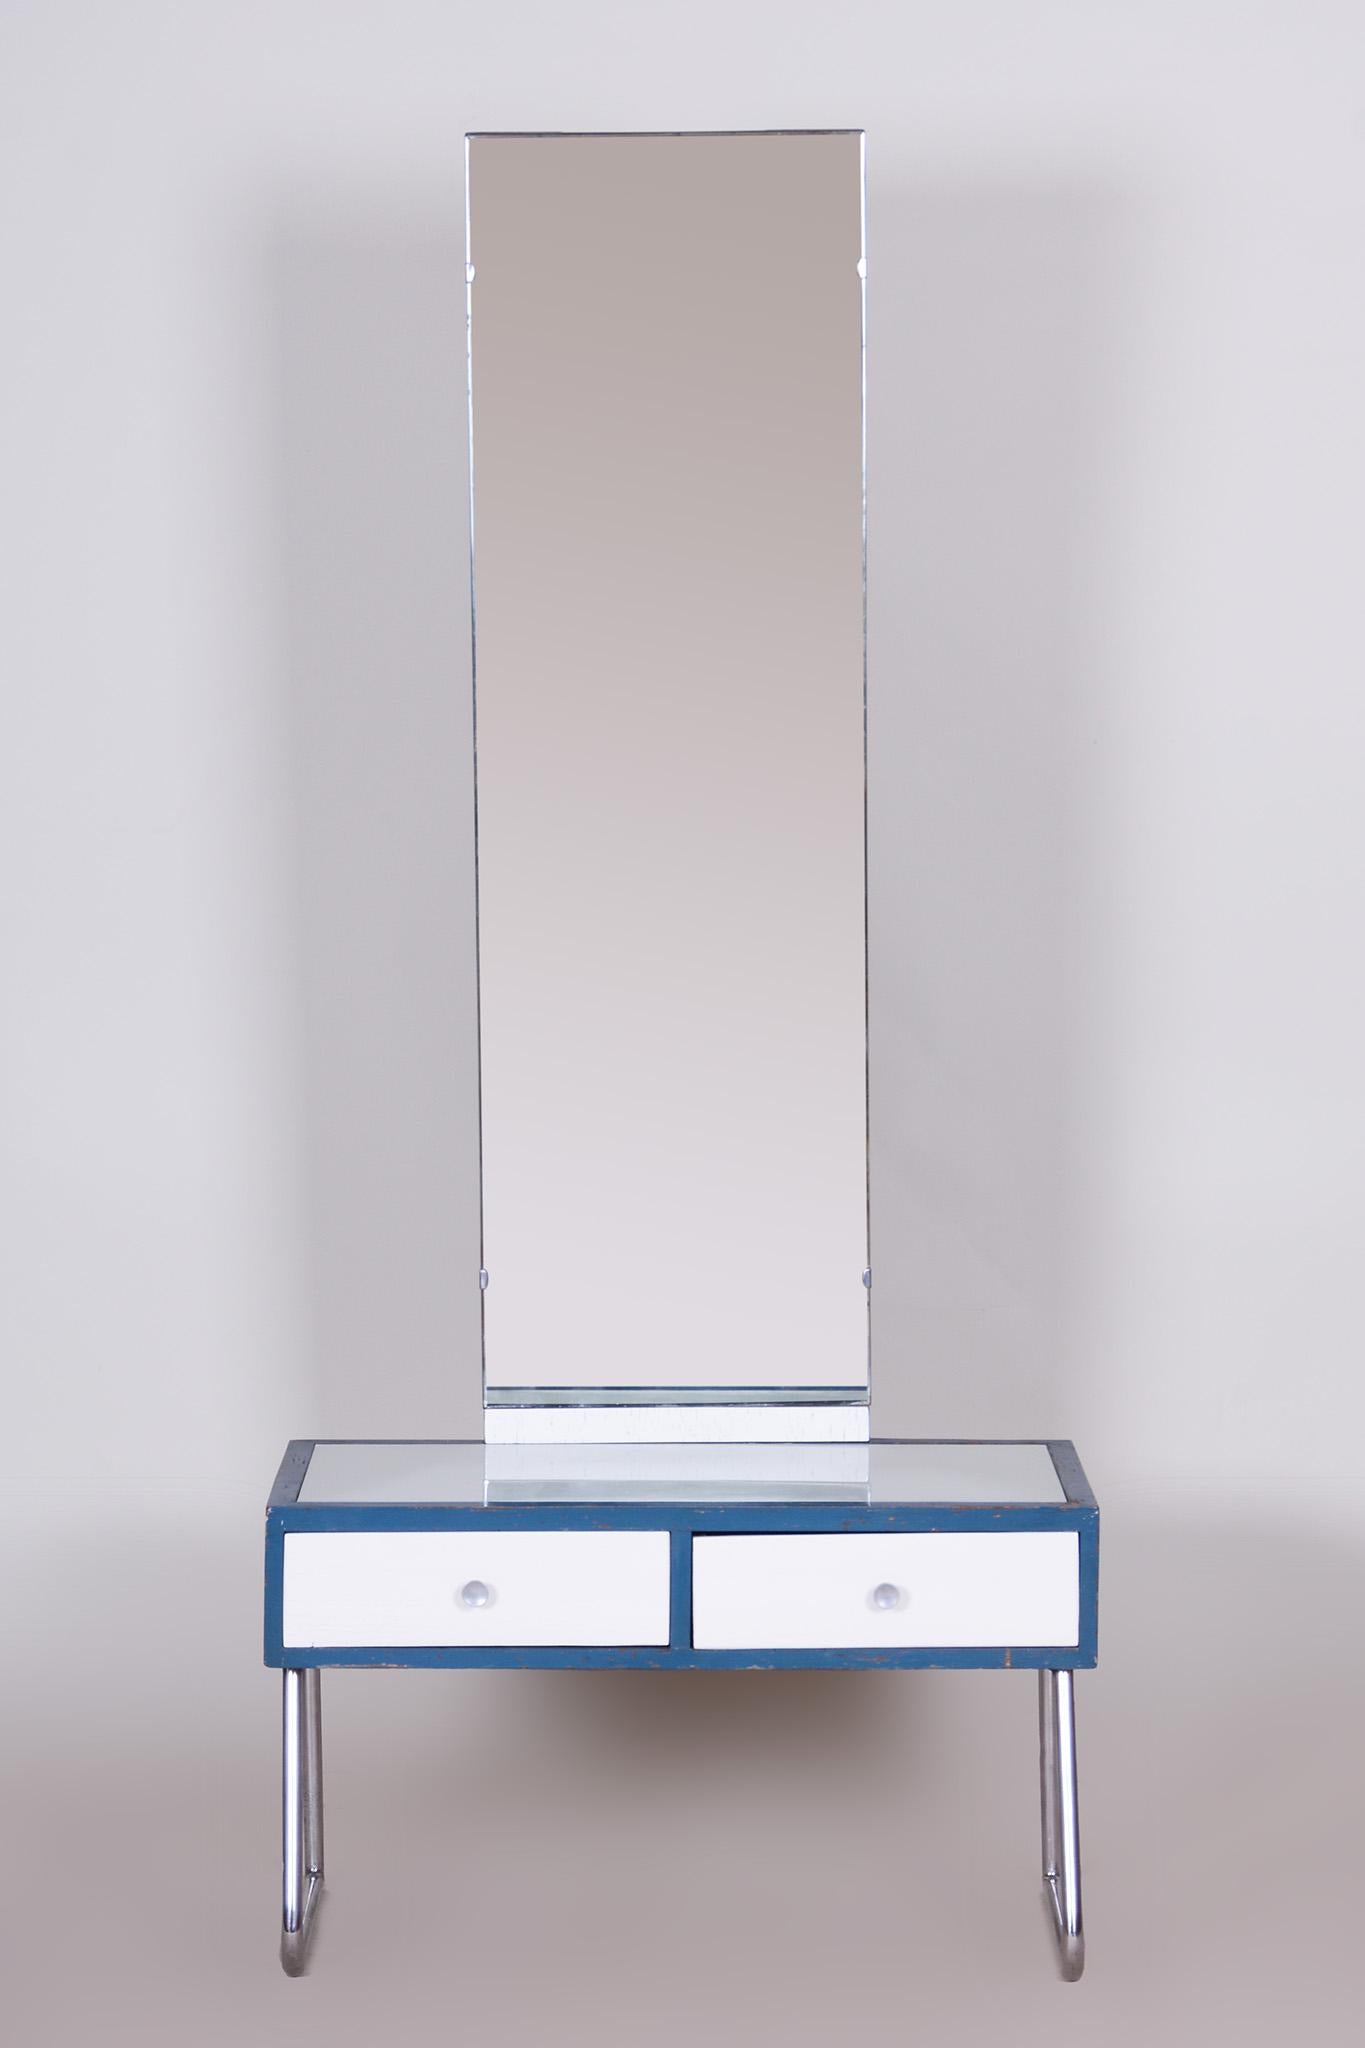 Blue and white chrome Bauhaus dressing mirror made in Czechia in the 1930s.
The mirror is completely original and has not been restored, it's in pristine original condition.
Chrome construction has been professionally cleaned.